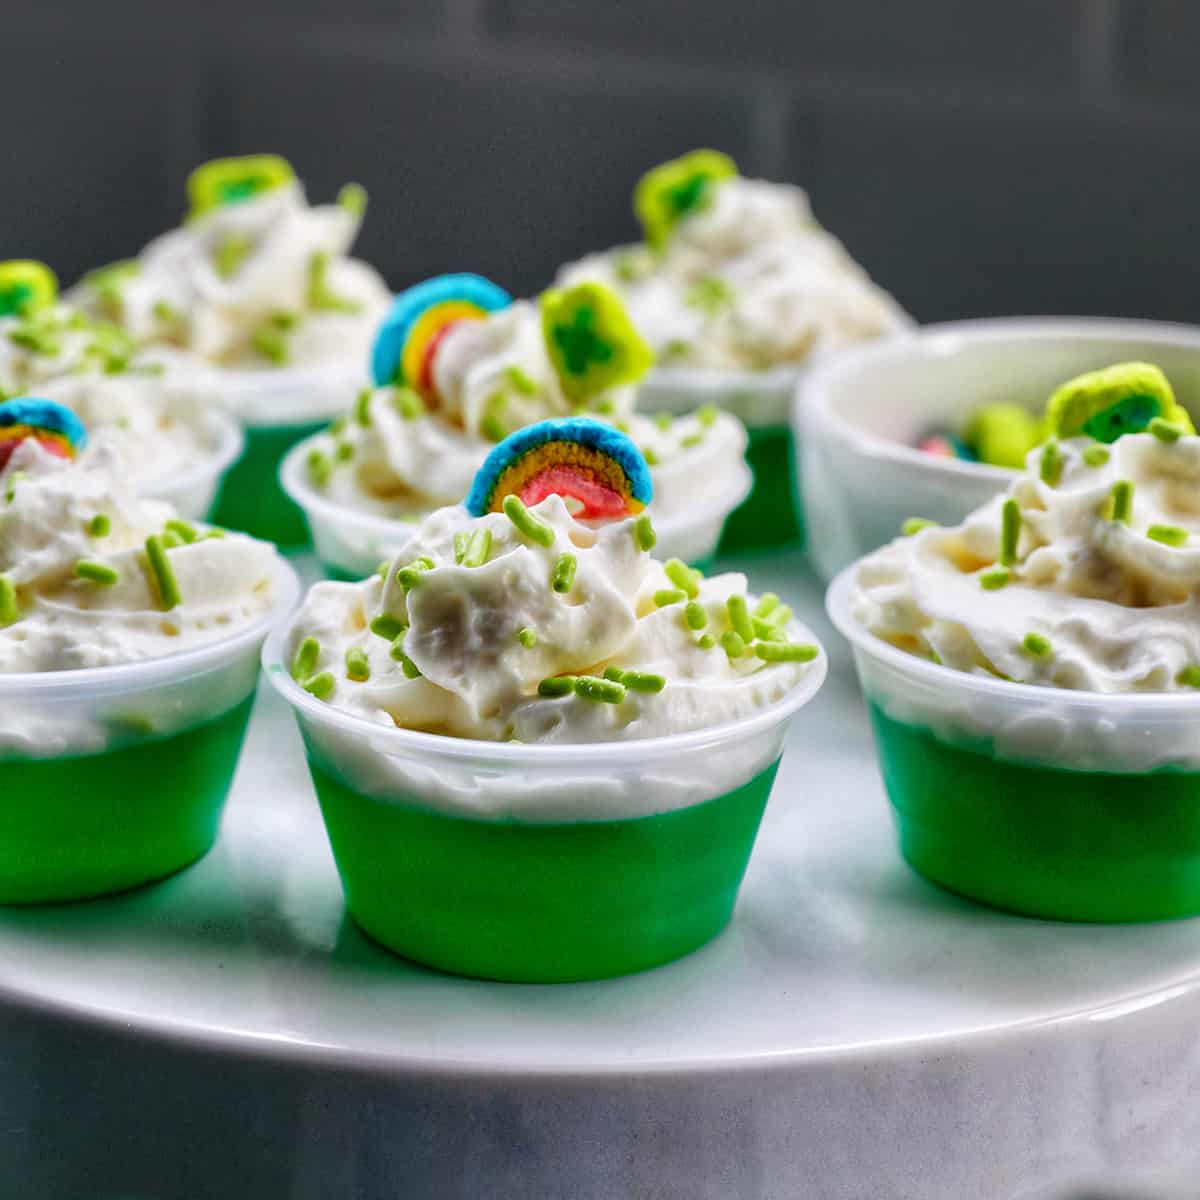 several green jello shots topped with whipped cream and colorful marshmallows on a cake pedestal.